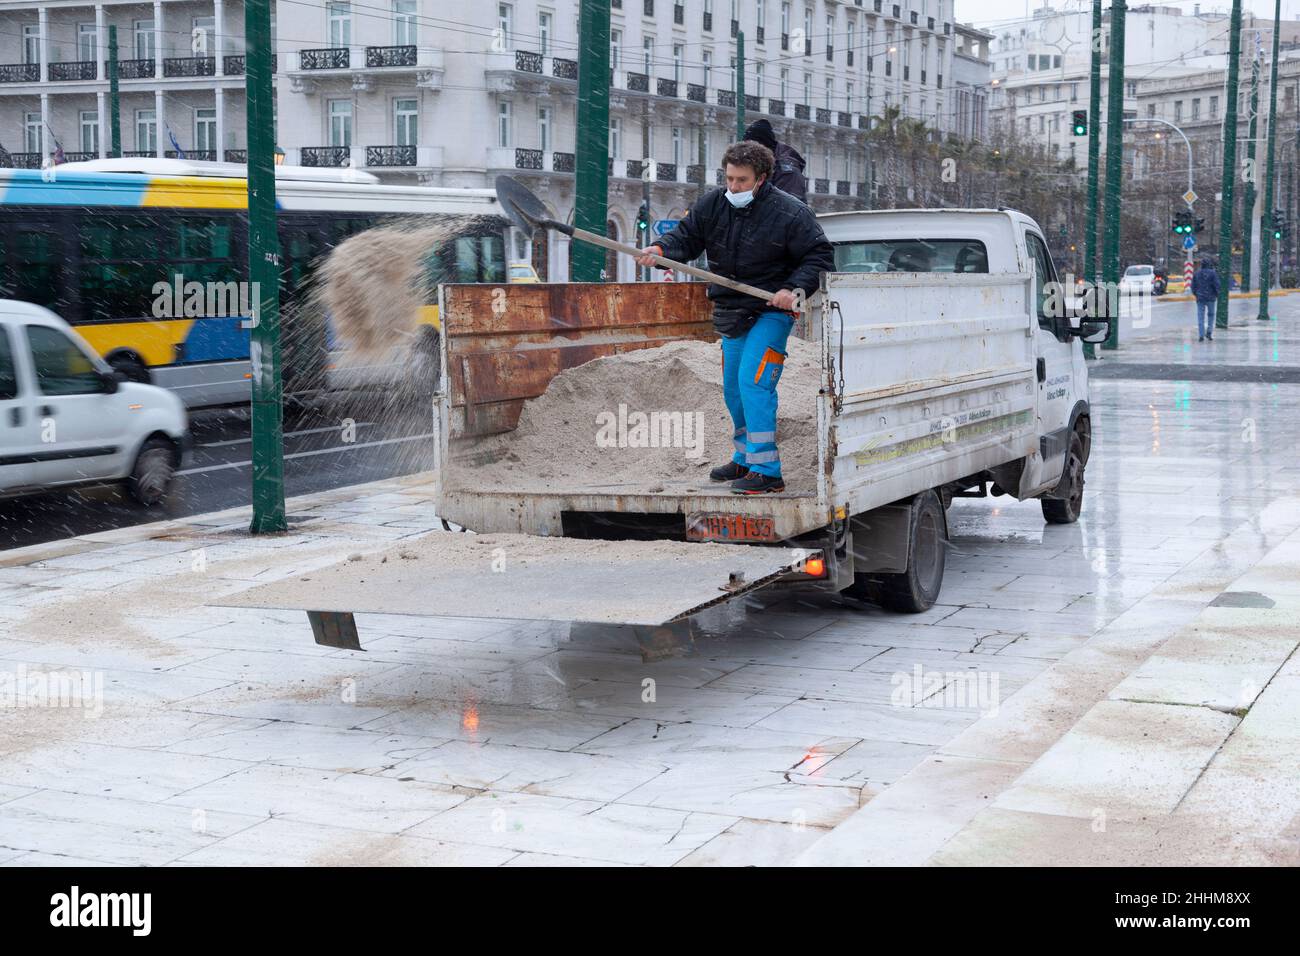 Employee of the technical service of the municipality of Athens throwing anti-ice salt in order to prevent ice formation during snowfall in Athens Stock Photo